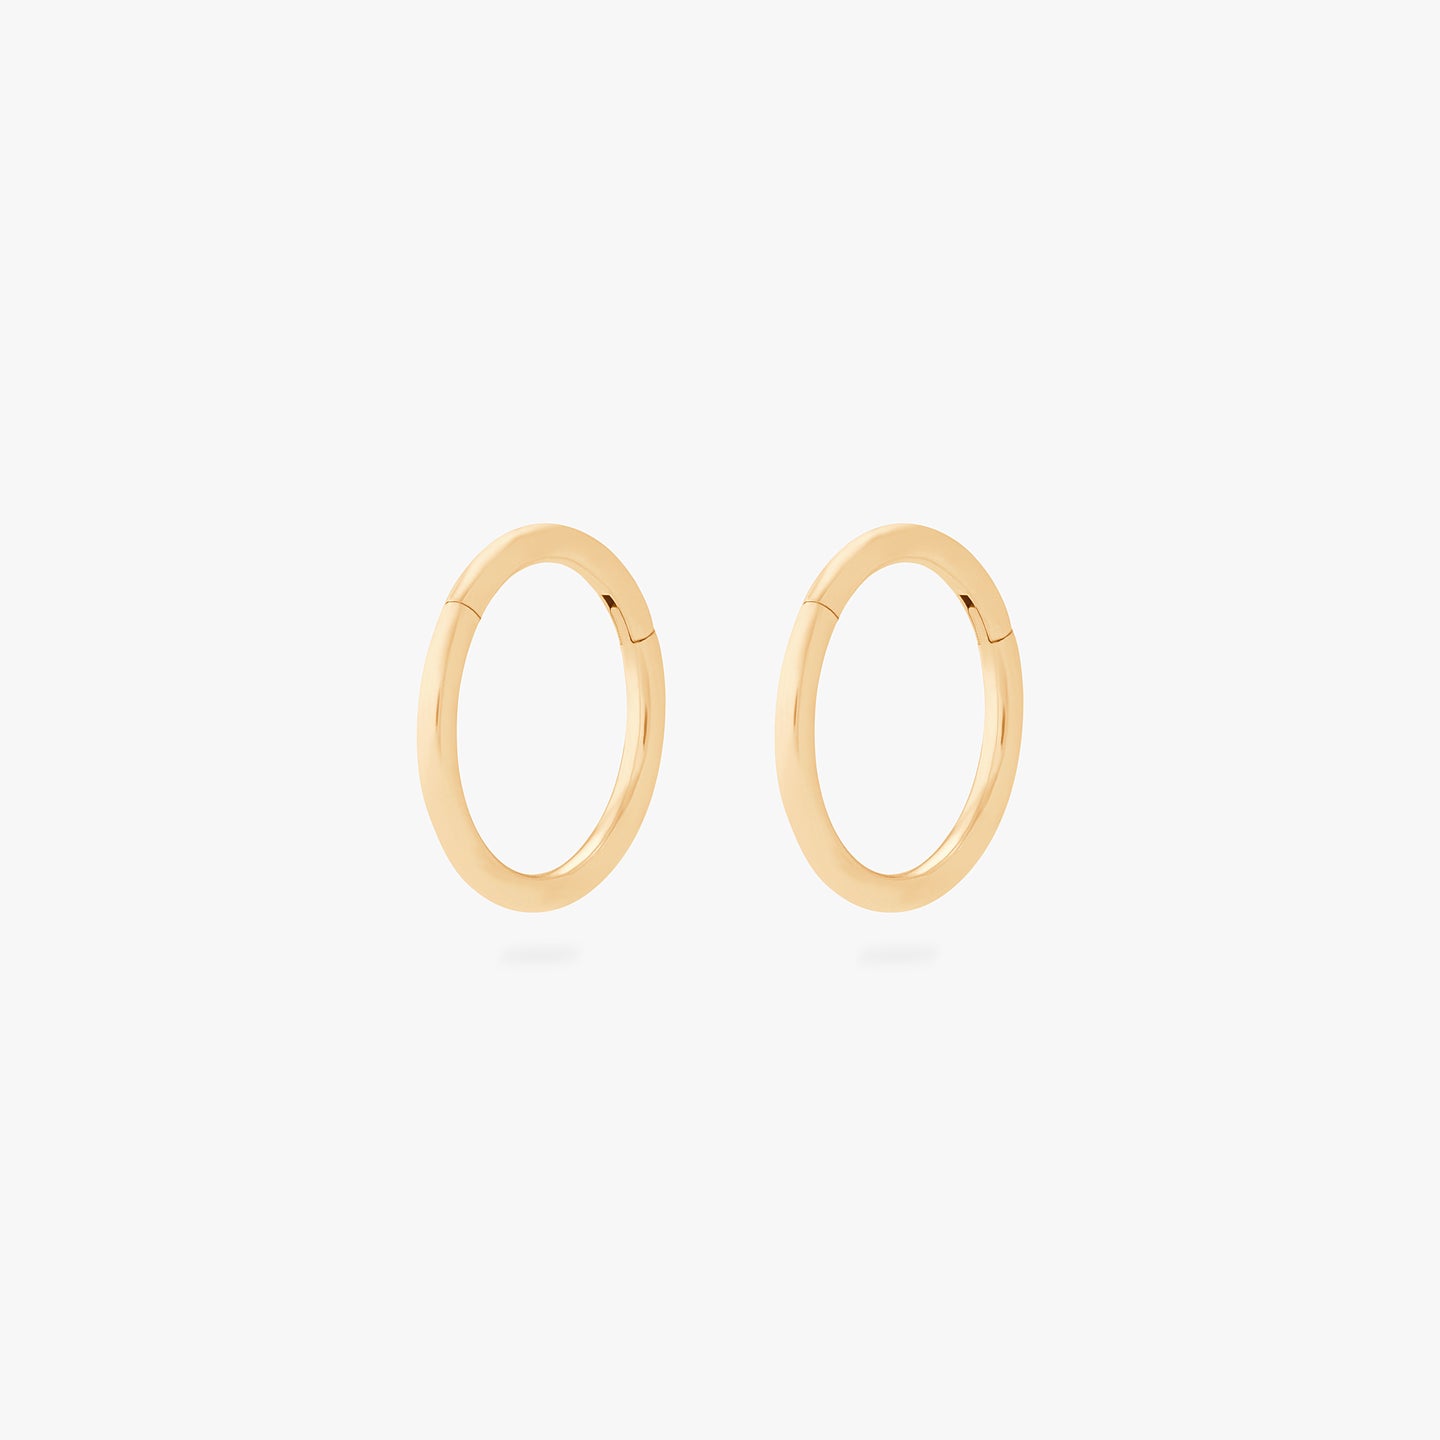 This is an image of a pair of gold clickers with 8mm inner diameters. [pair] color:null|gold